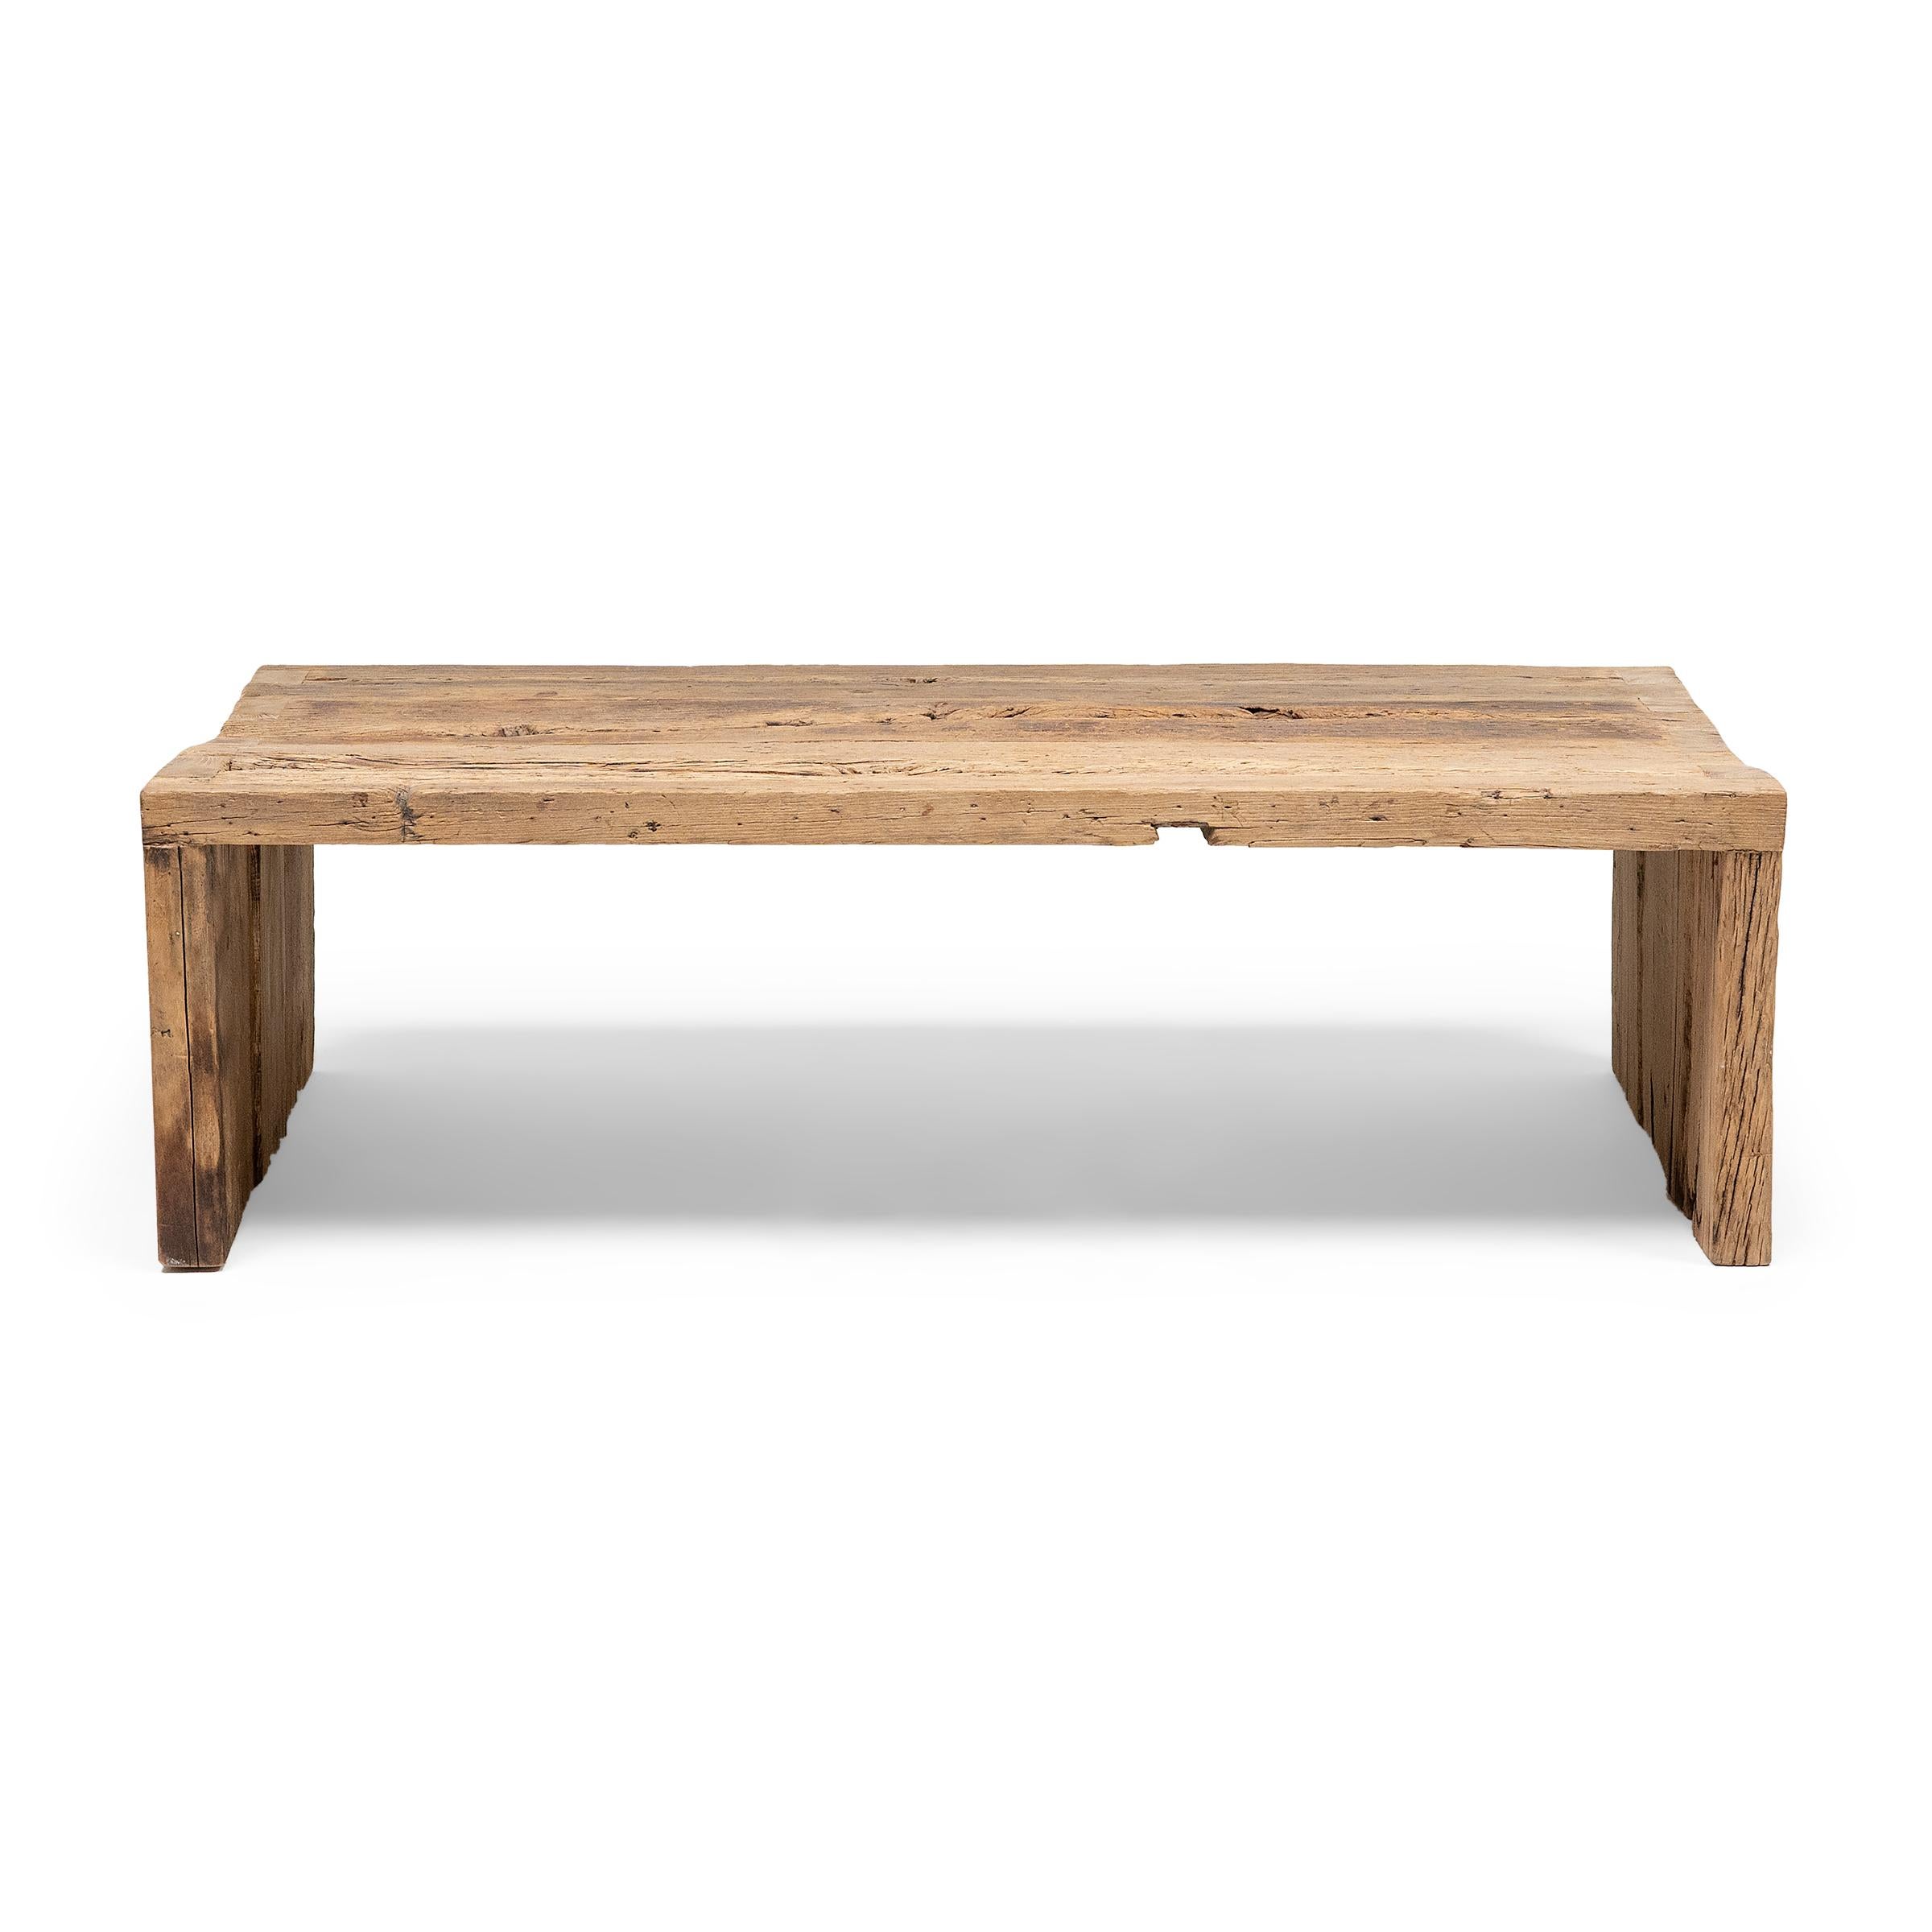 This modern console table is a celebration of wabi-sabi style. Crafted of wood reclaimed from Qing-dynasty architecture, the table has a minimalist waterfall design with dovetailed corners that recreate traditional joinery methods and add intrigue